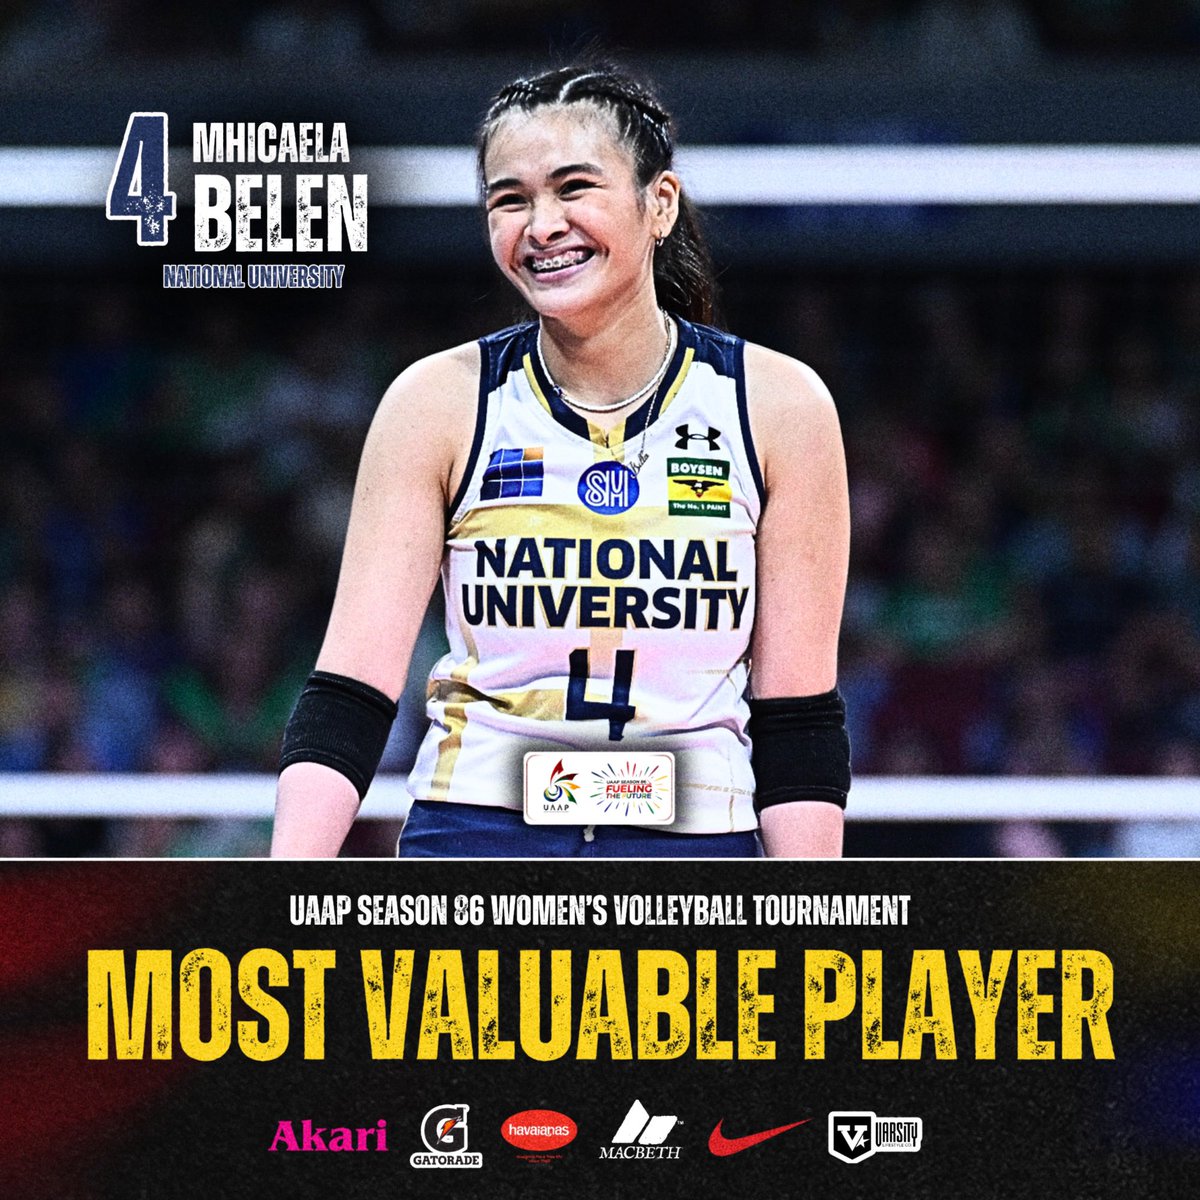 Season 84 MVP Mhicaela Belen has once again proven her dominance on the volleyball court by reclaiming her title and being crowned the MVP of the #UAAPSeason86 Women's Volleyball Tournament. Congrats, Belen! #FuelingTheFuture